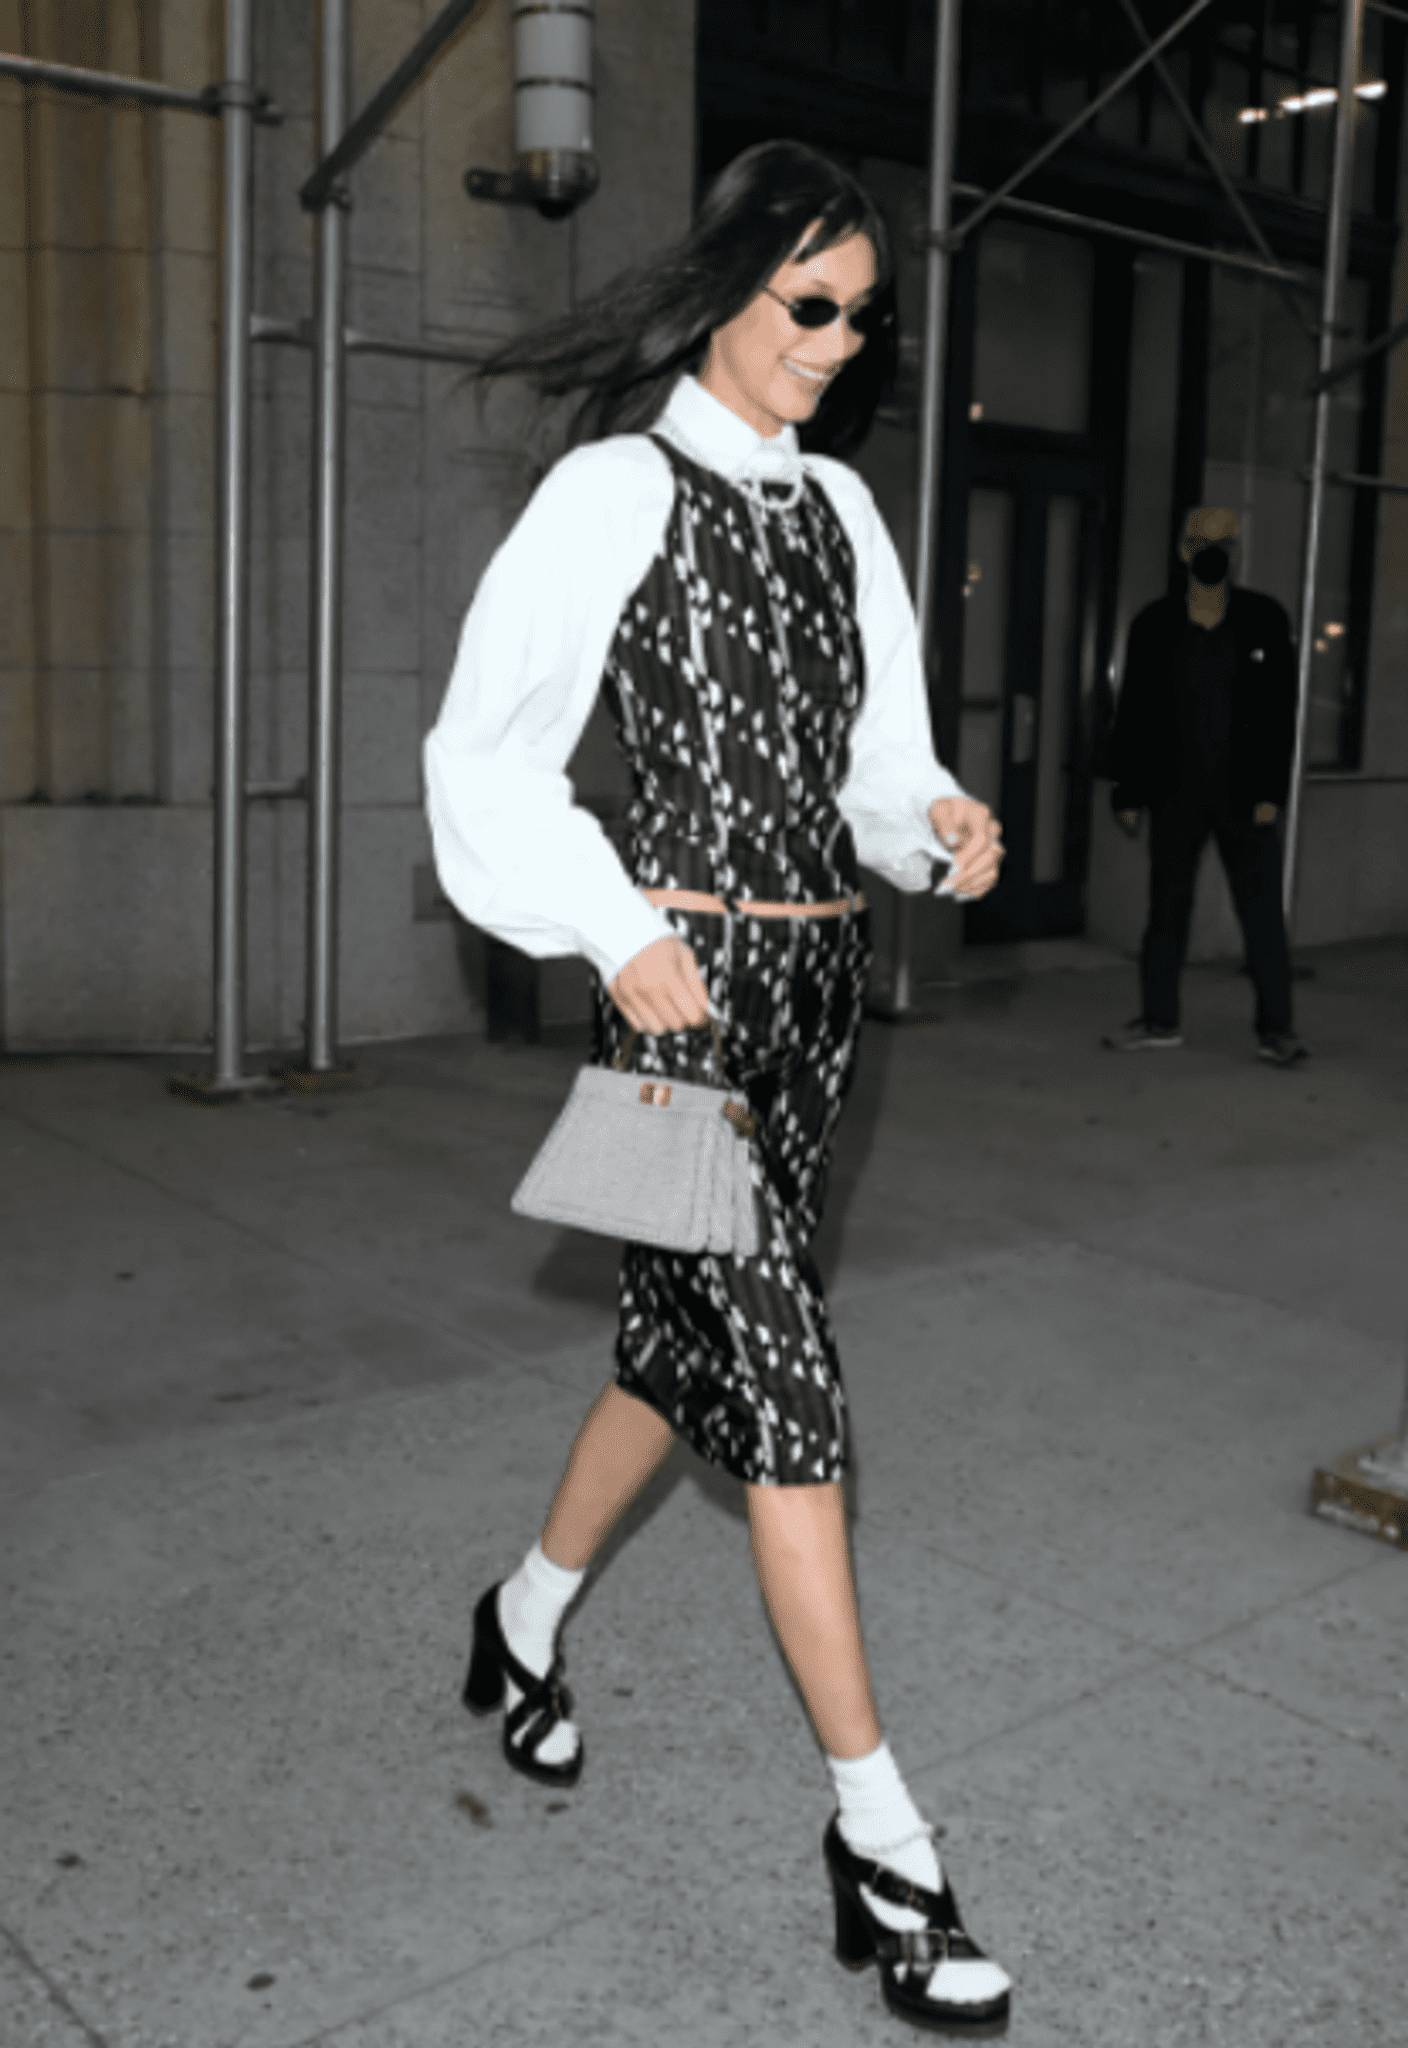 ”bella-hadid-proved-that-socks-with-sandals-are-still-relevant”